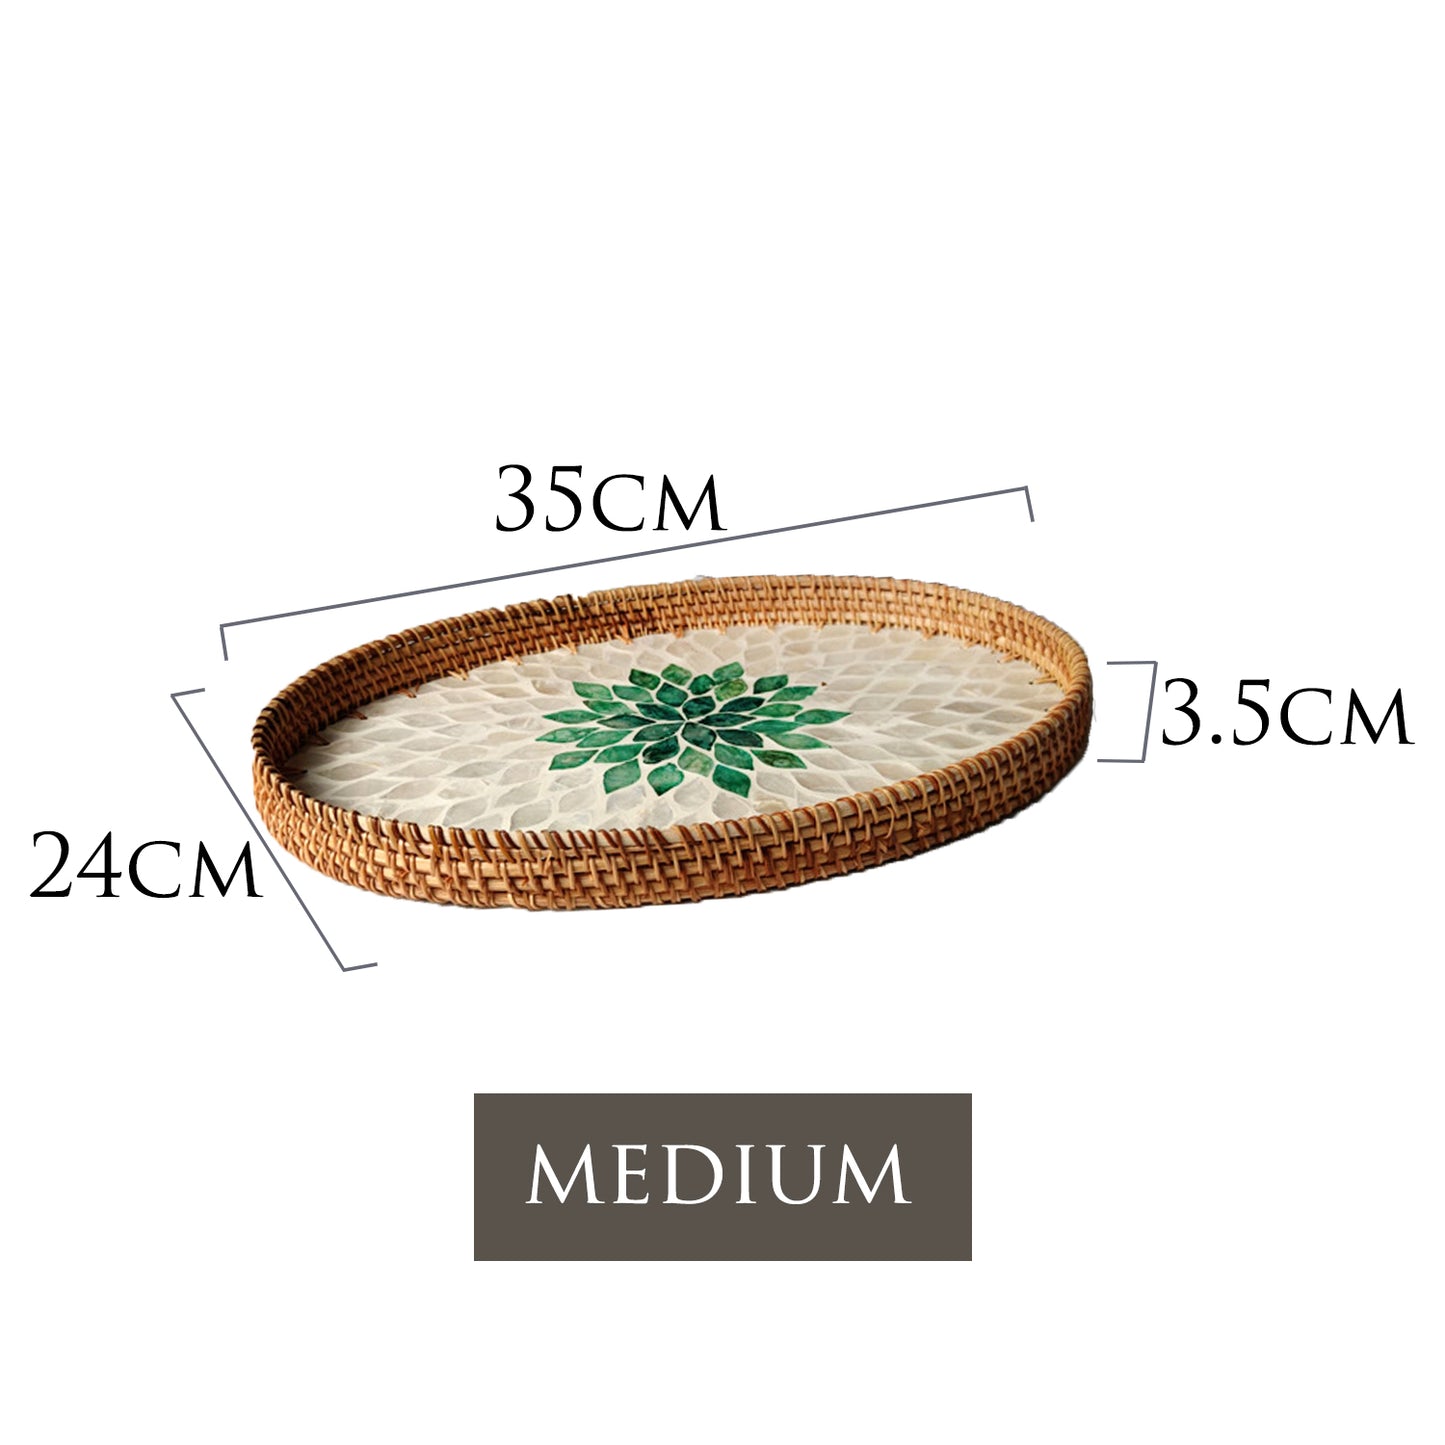 Shell-inlaid Rattan Woven Tray